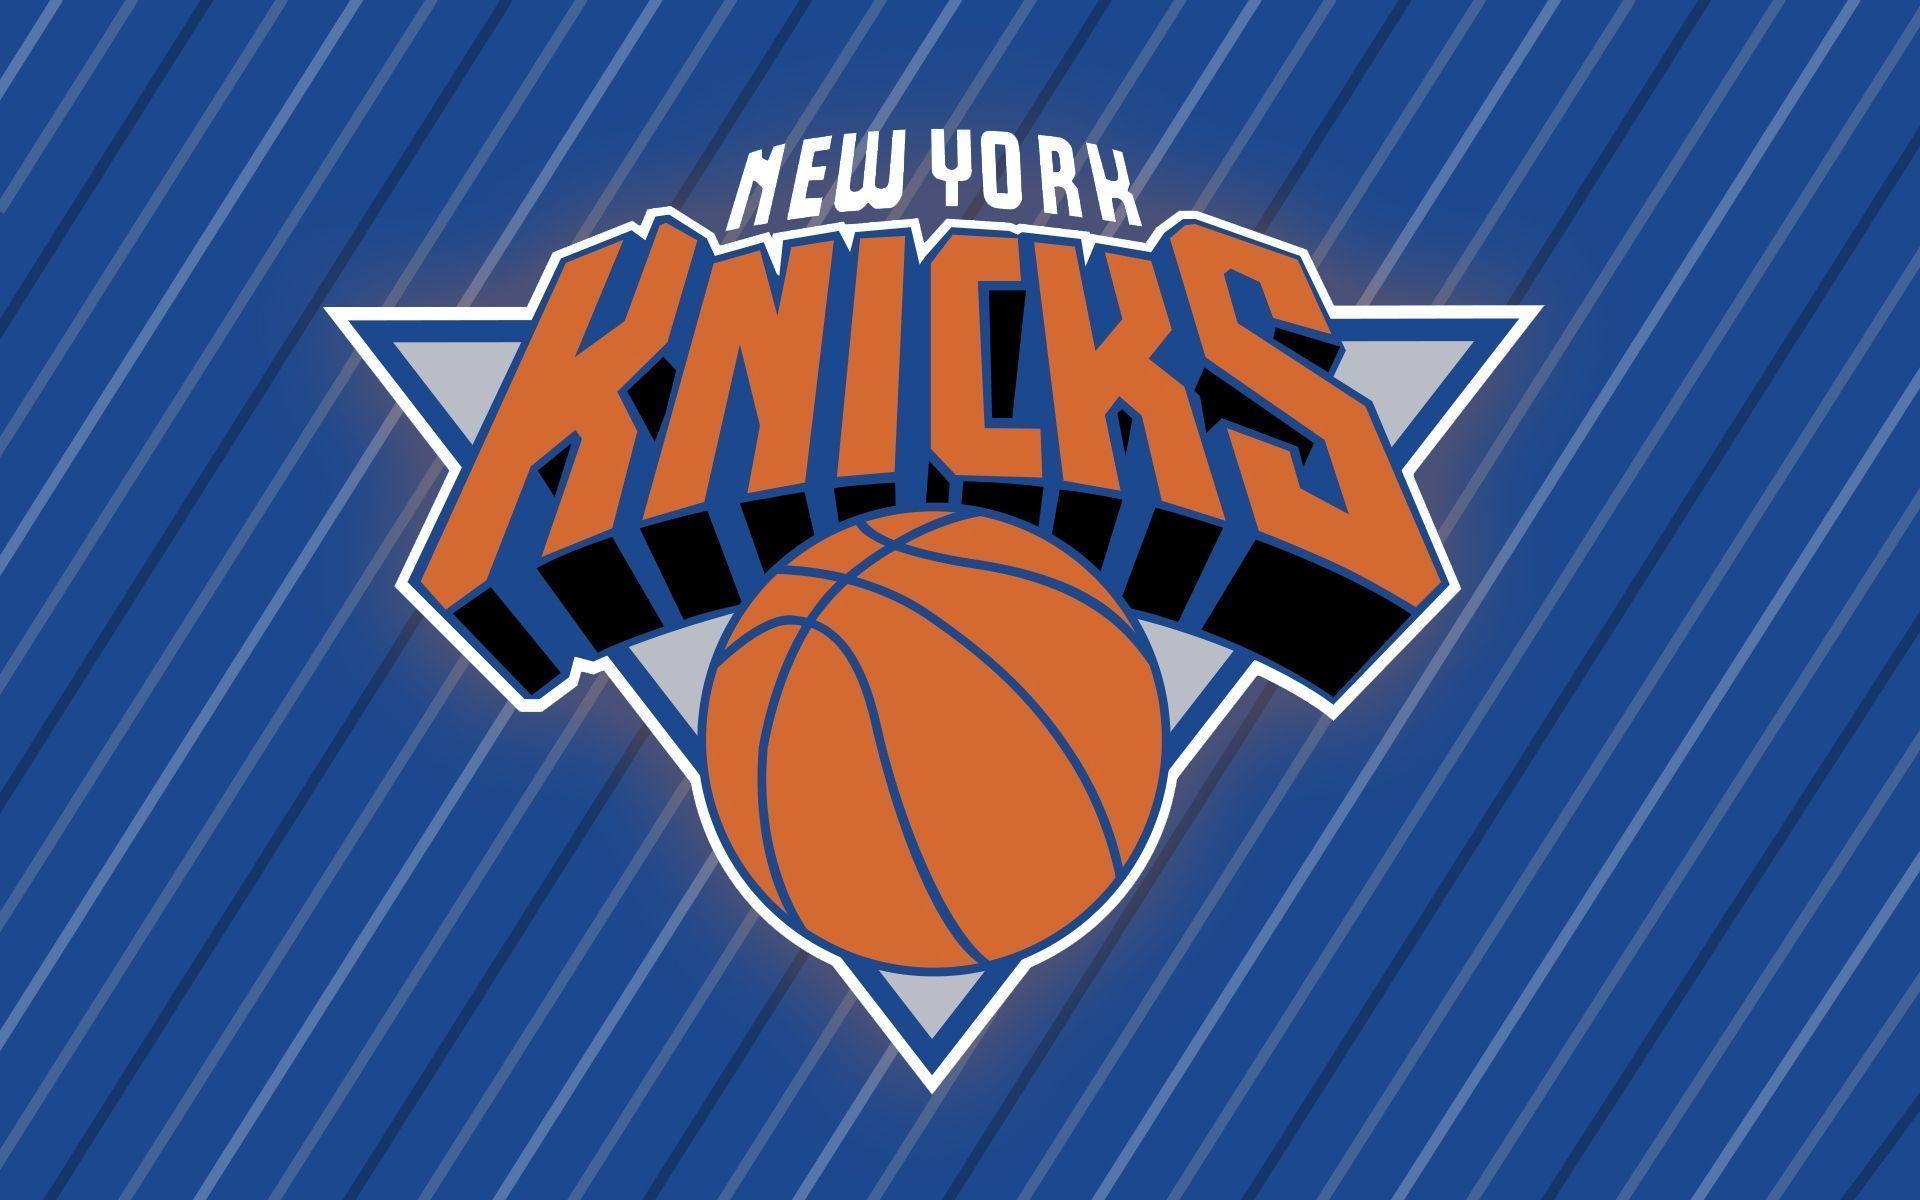 New York Knicks Wallpaper High Resolution and Quality Download